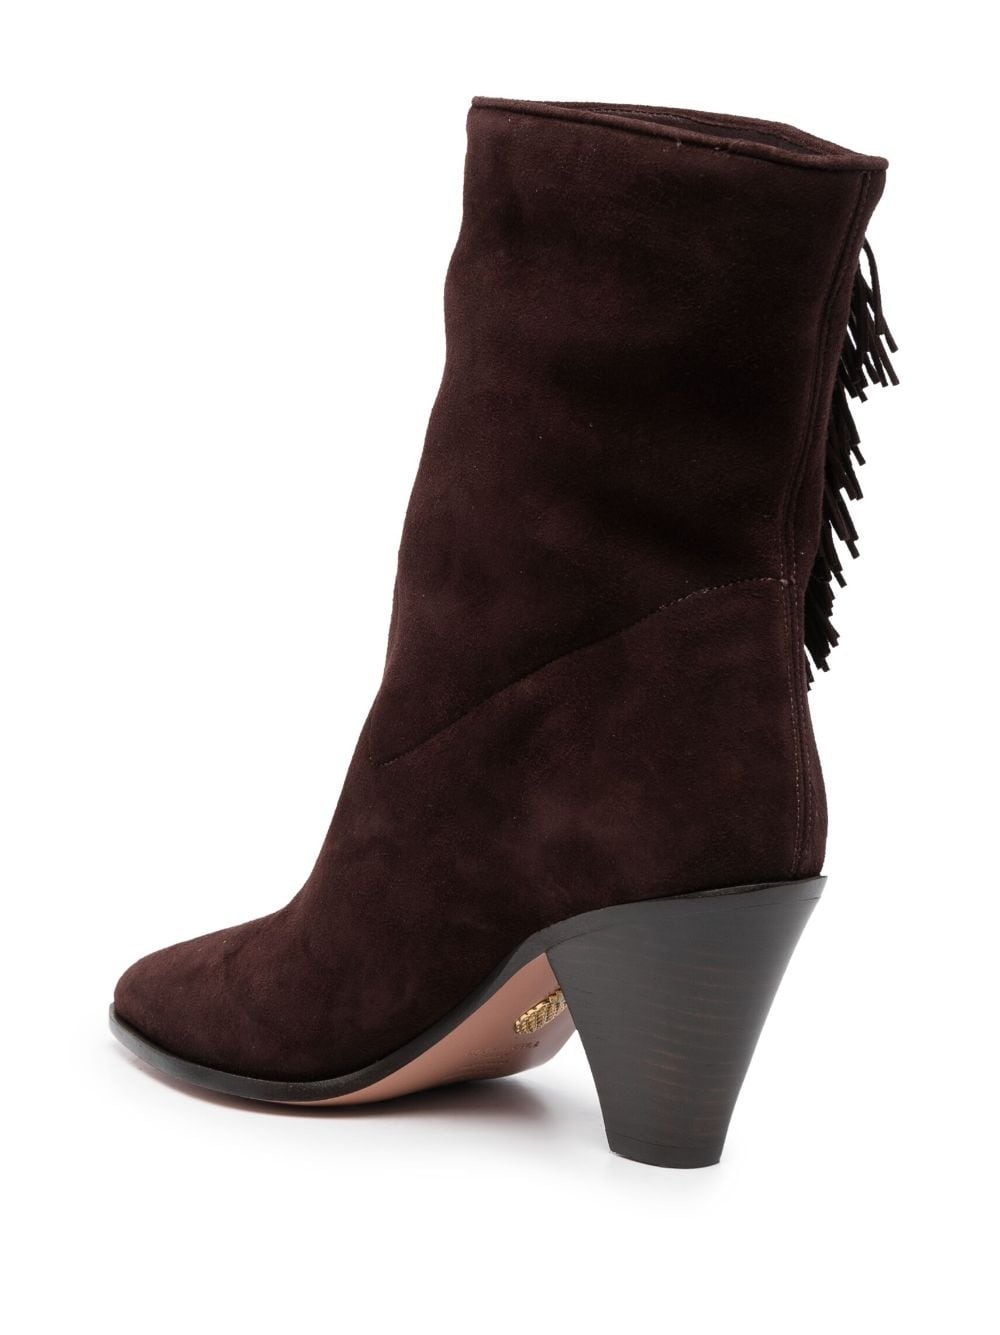 Marfa 70mm fringed suede boots - 3